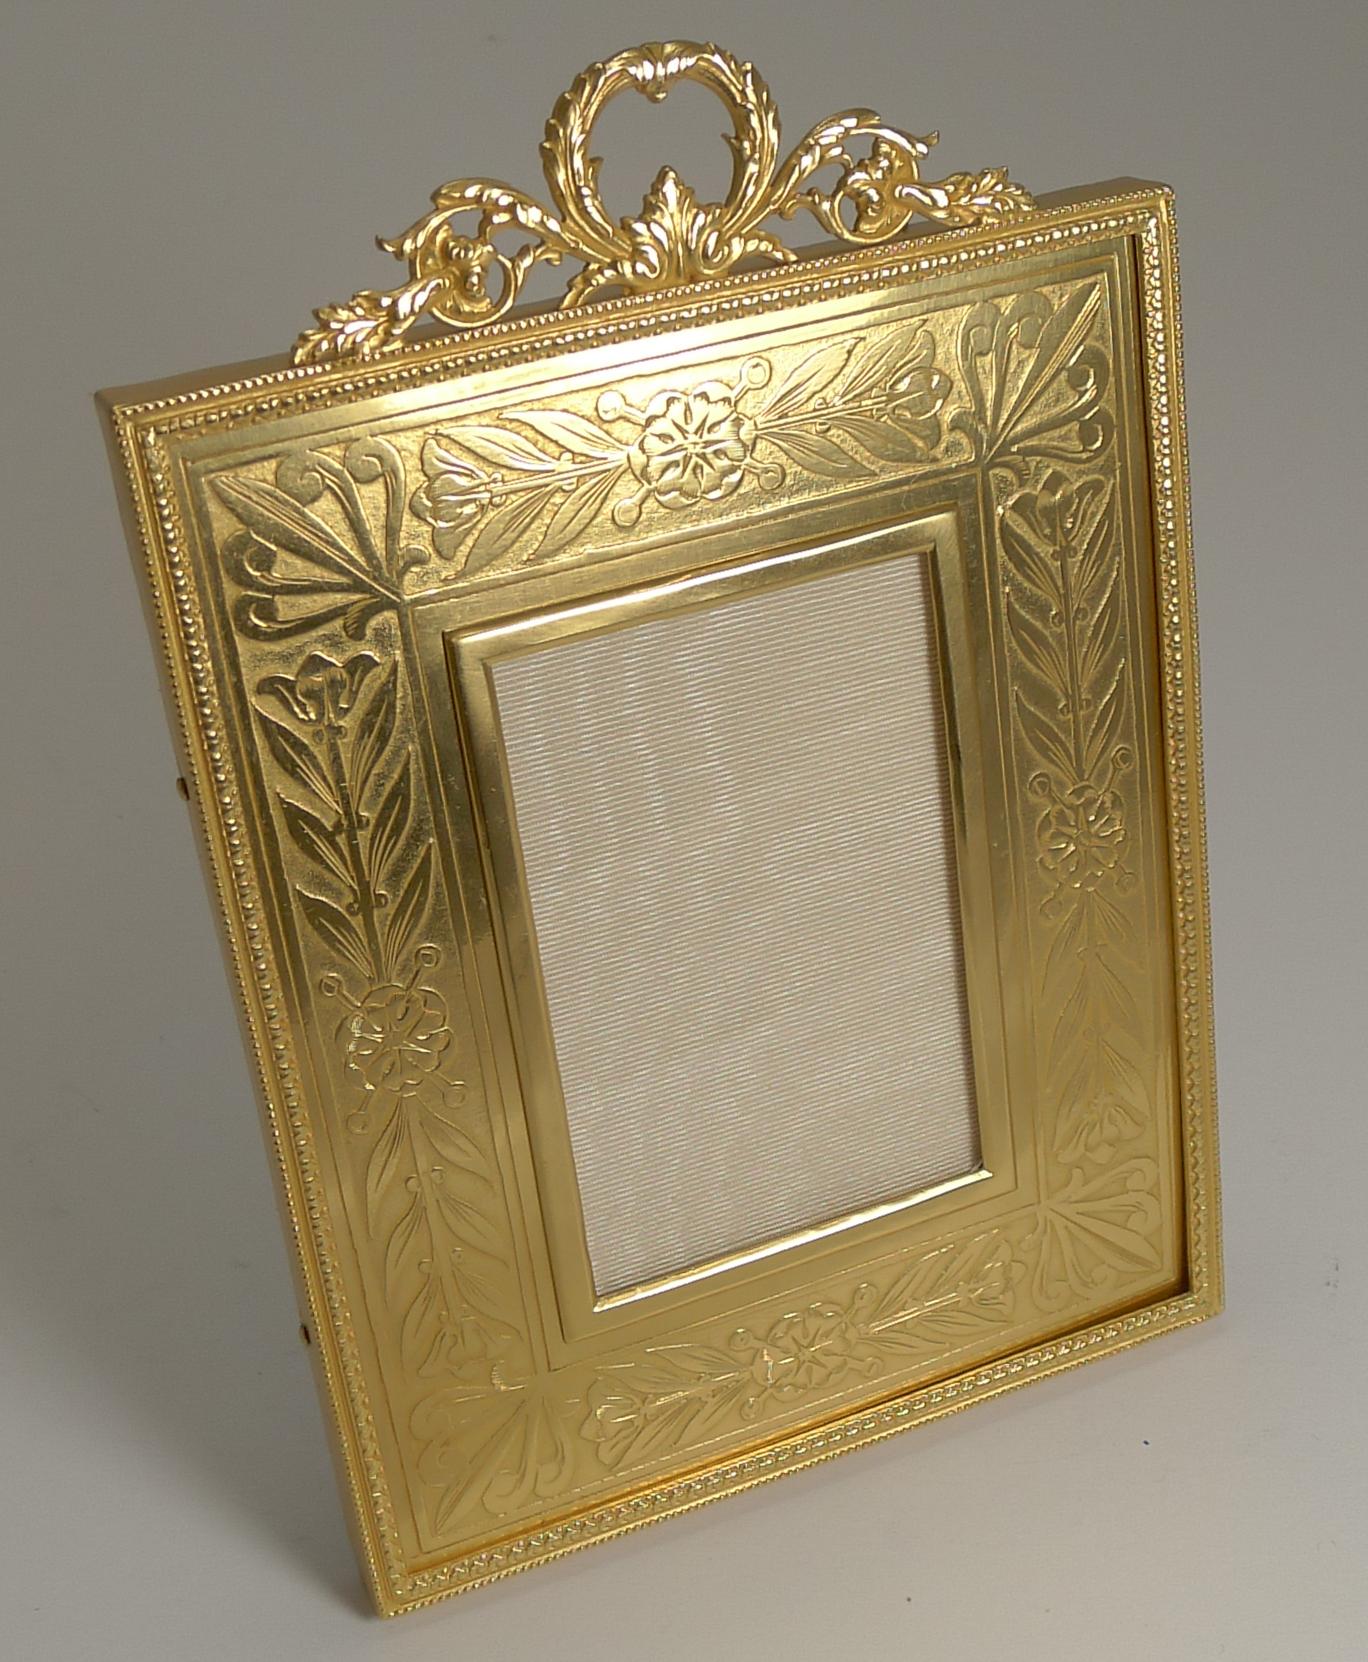 A truly fine French bronze photograph frame, beautifully gilded with the most stunning engraved slip surrounding the aperture, always highly prized.

The backing has been professionally refreshed to create a backing ready to last a further 100